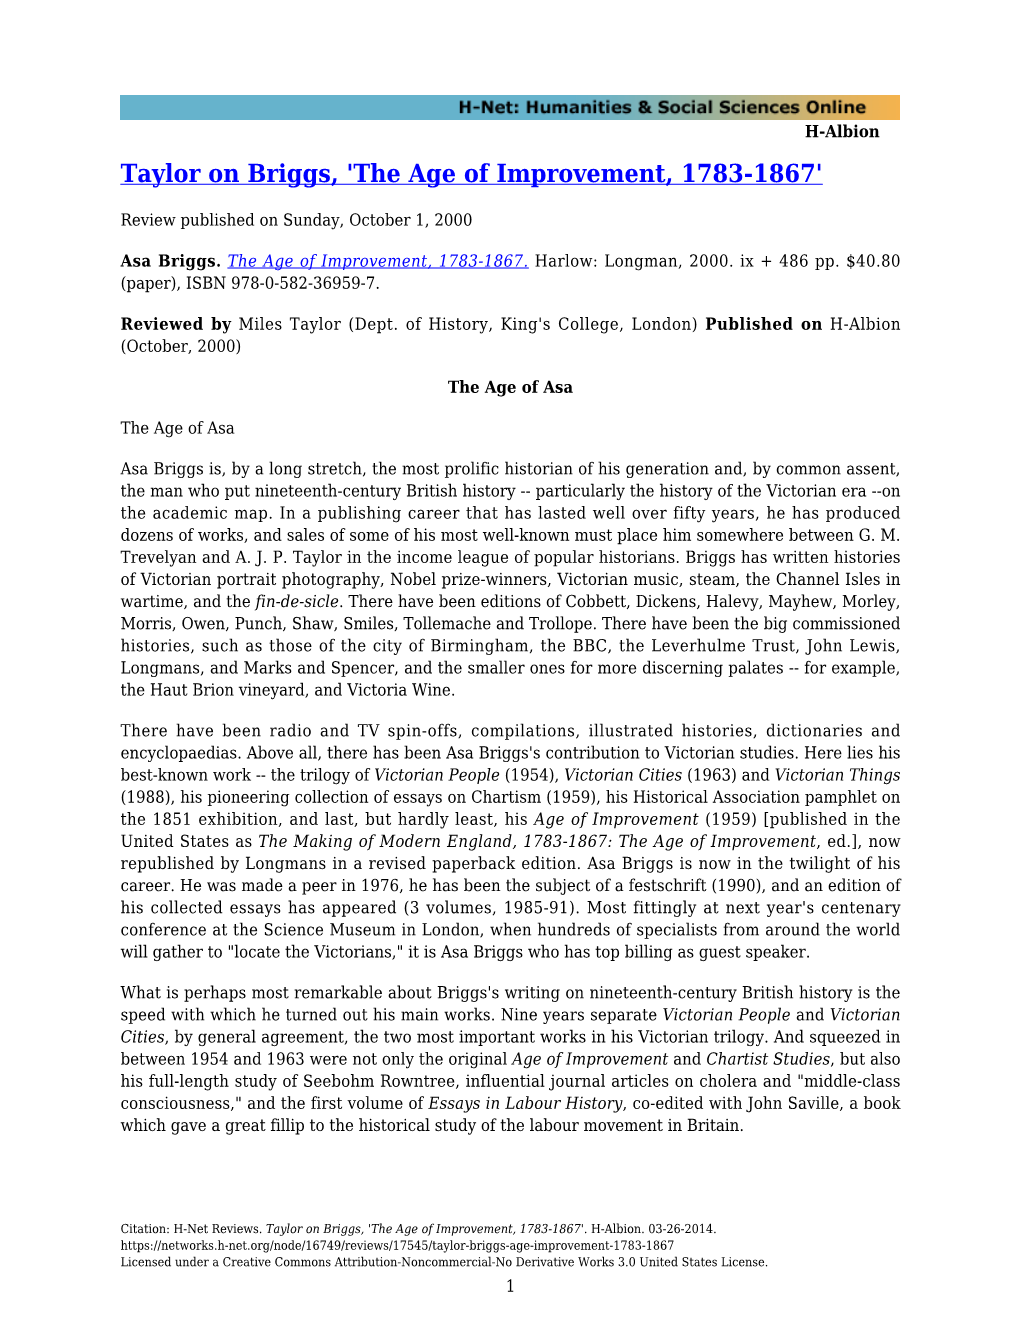 Taylor on Briggs, 'The Age of Improvement, 1783-1867'